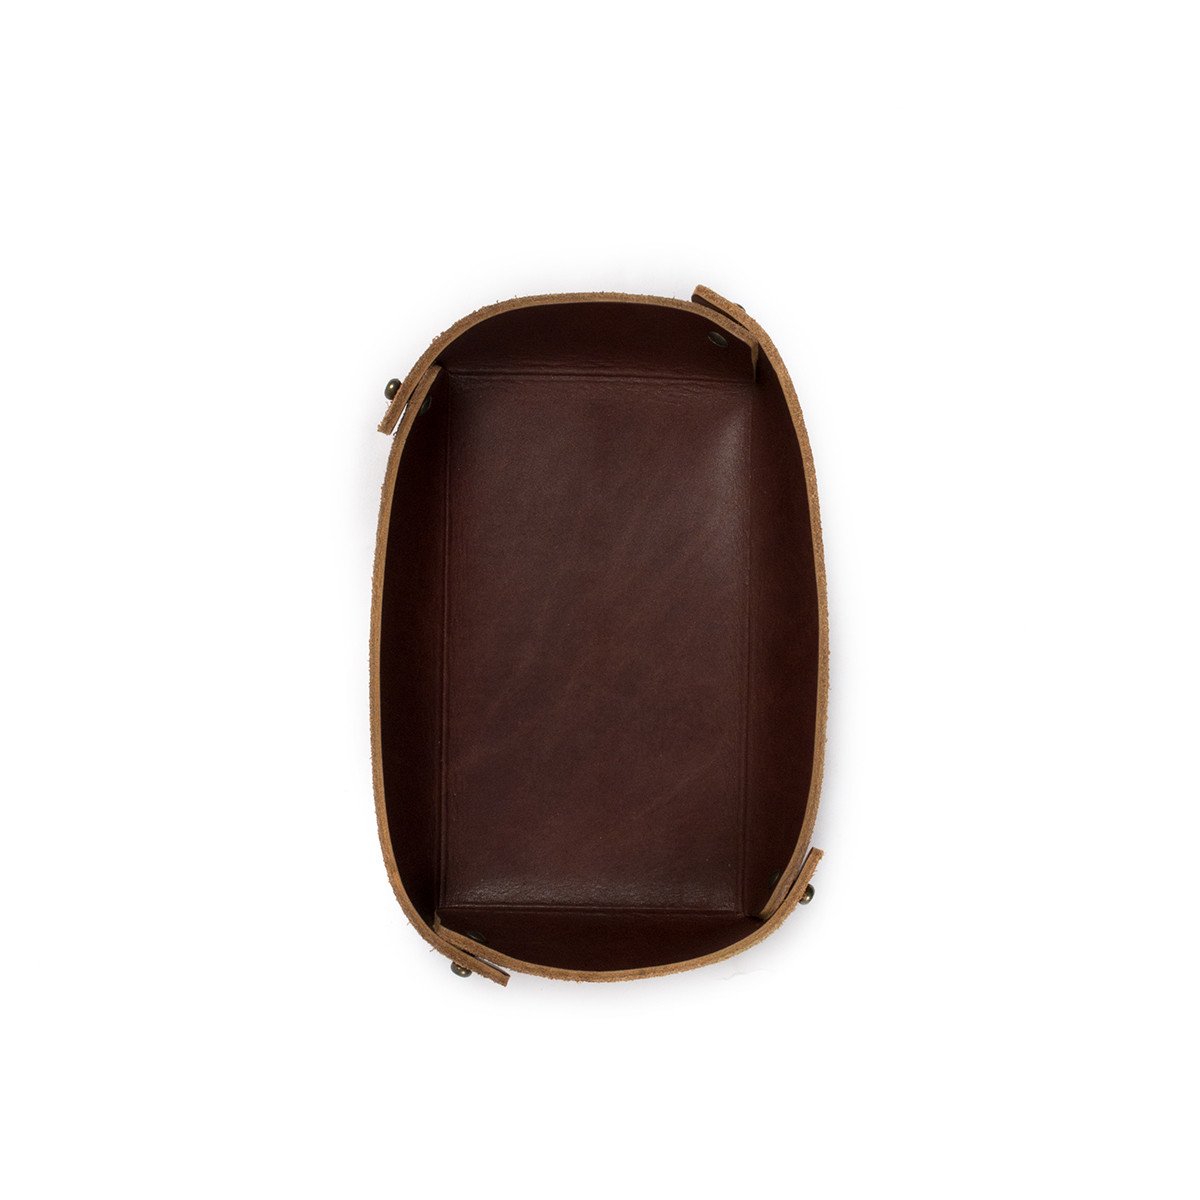 Cognac Leather Catch All Tray – LC King Mfg